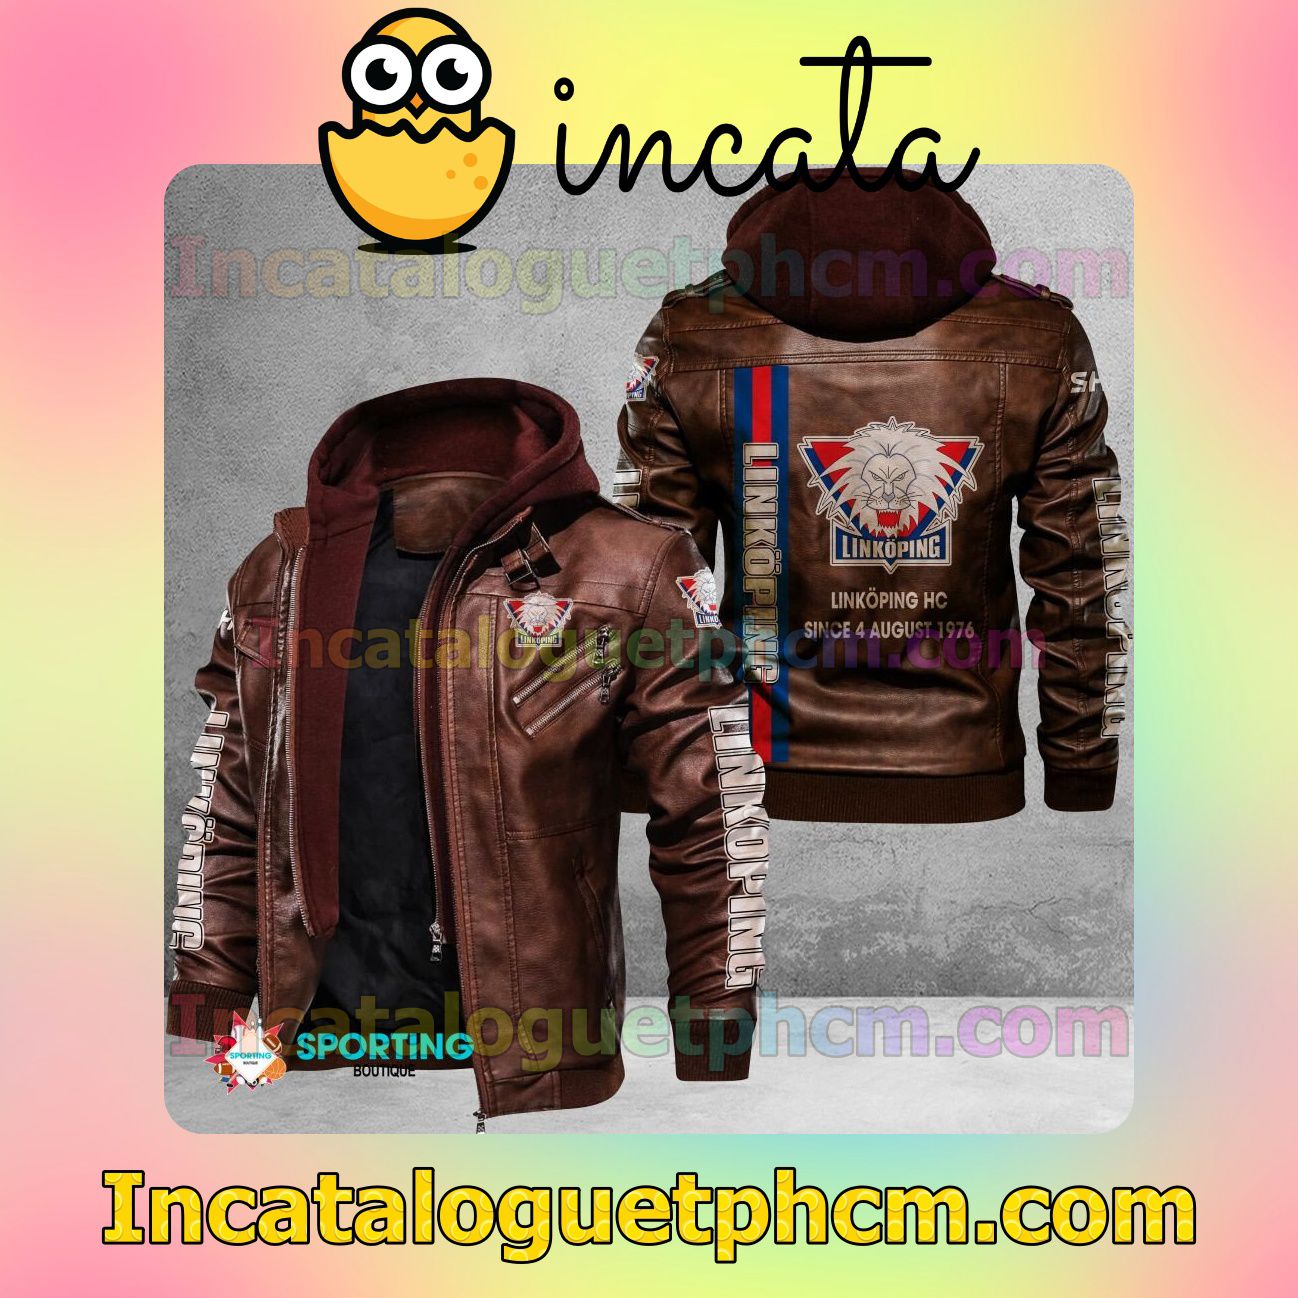 Check out Linkoping HC Brand Uniform Leather Jacket